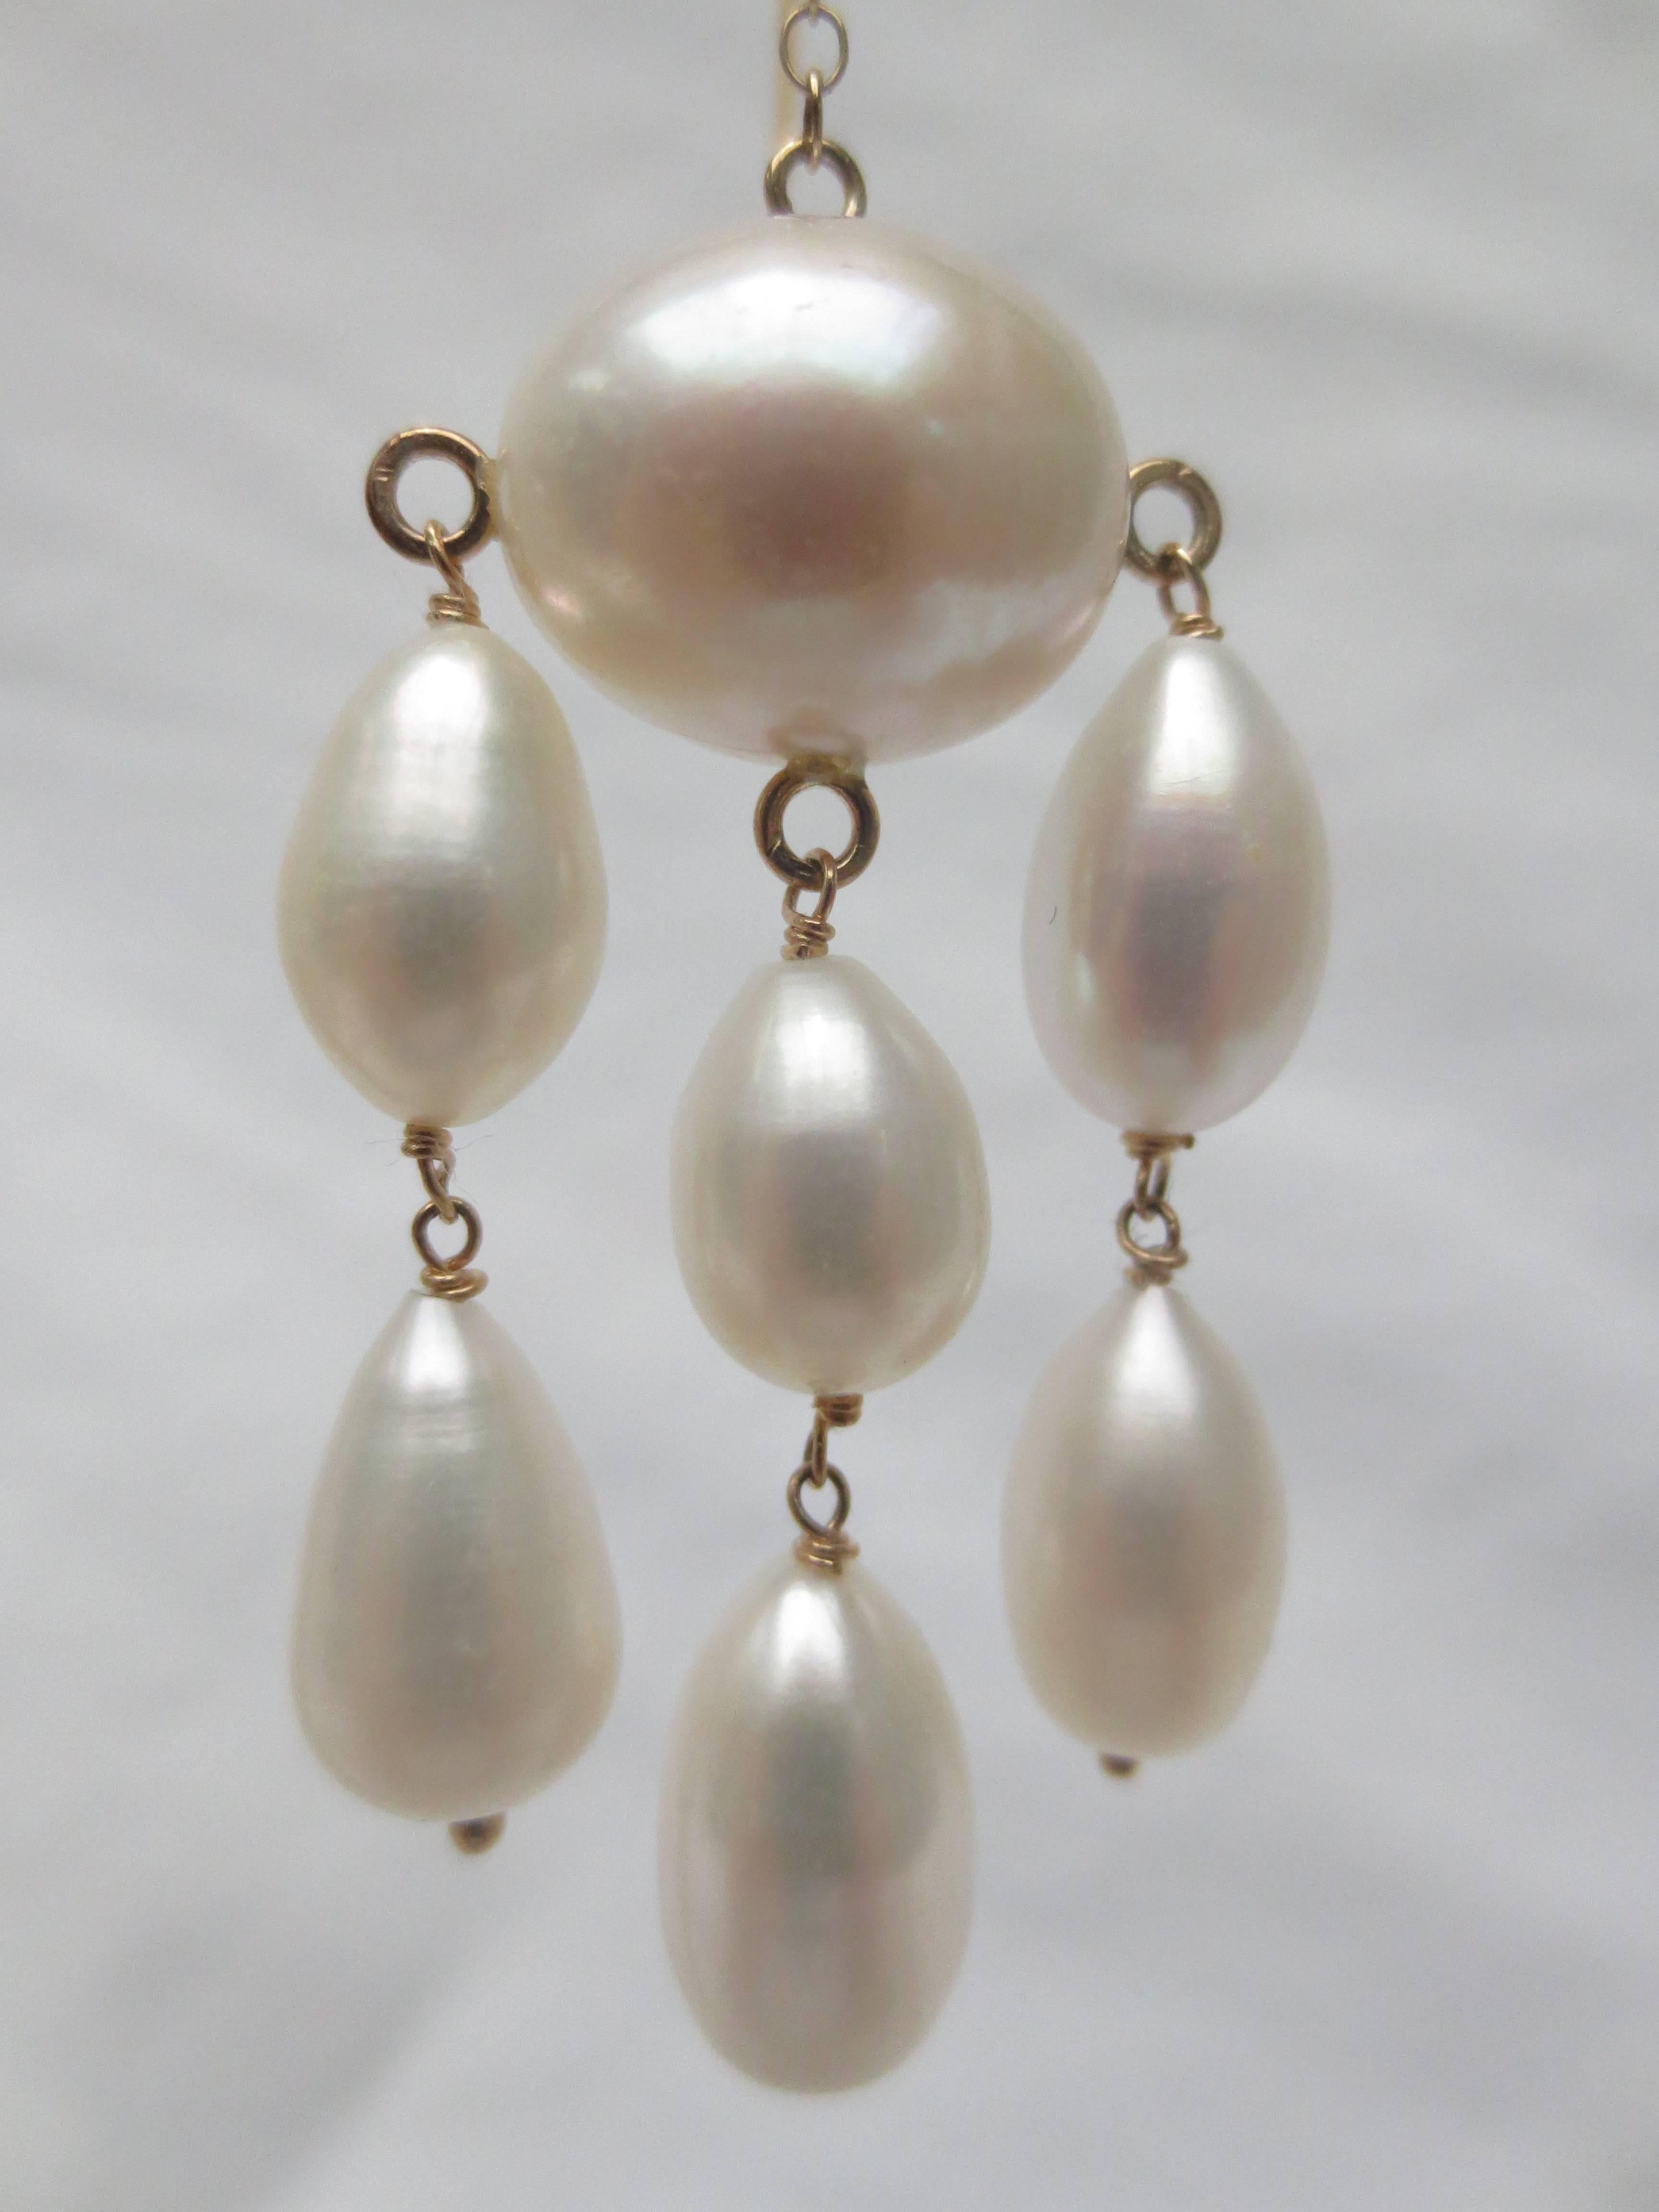 Each earring consists of 6 teardrop baroque pearls hanging from a large oval (11mm W) pearl by 14k yellow gold wire. Large, but not imposing; refined, yet lightweight. The dangling pearls and gold chain make for a lot of movement. Make each step a